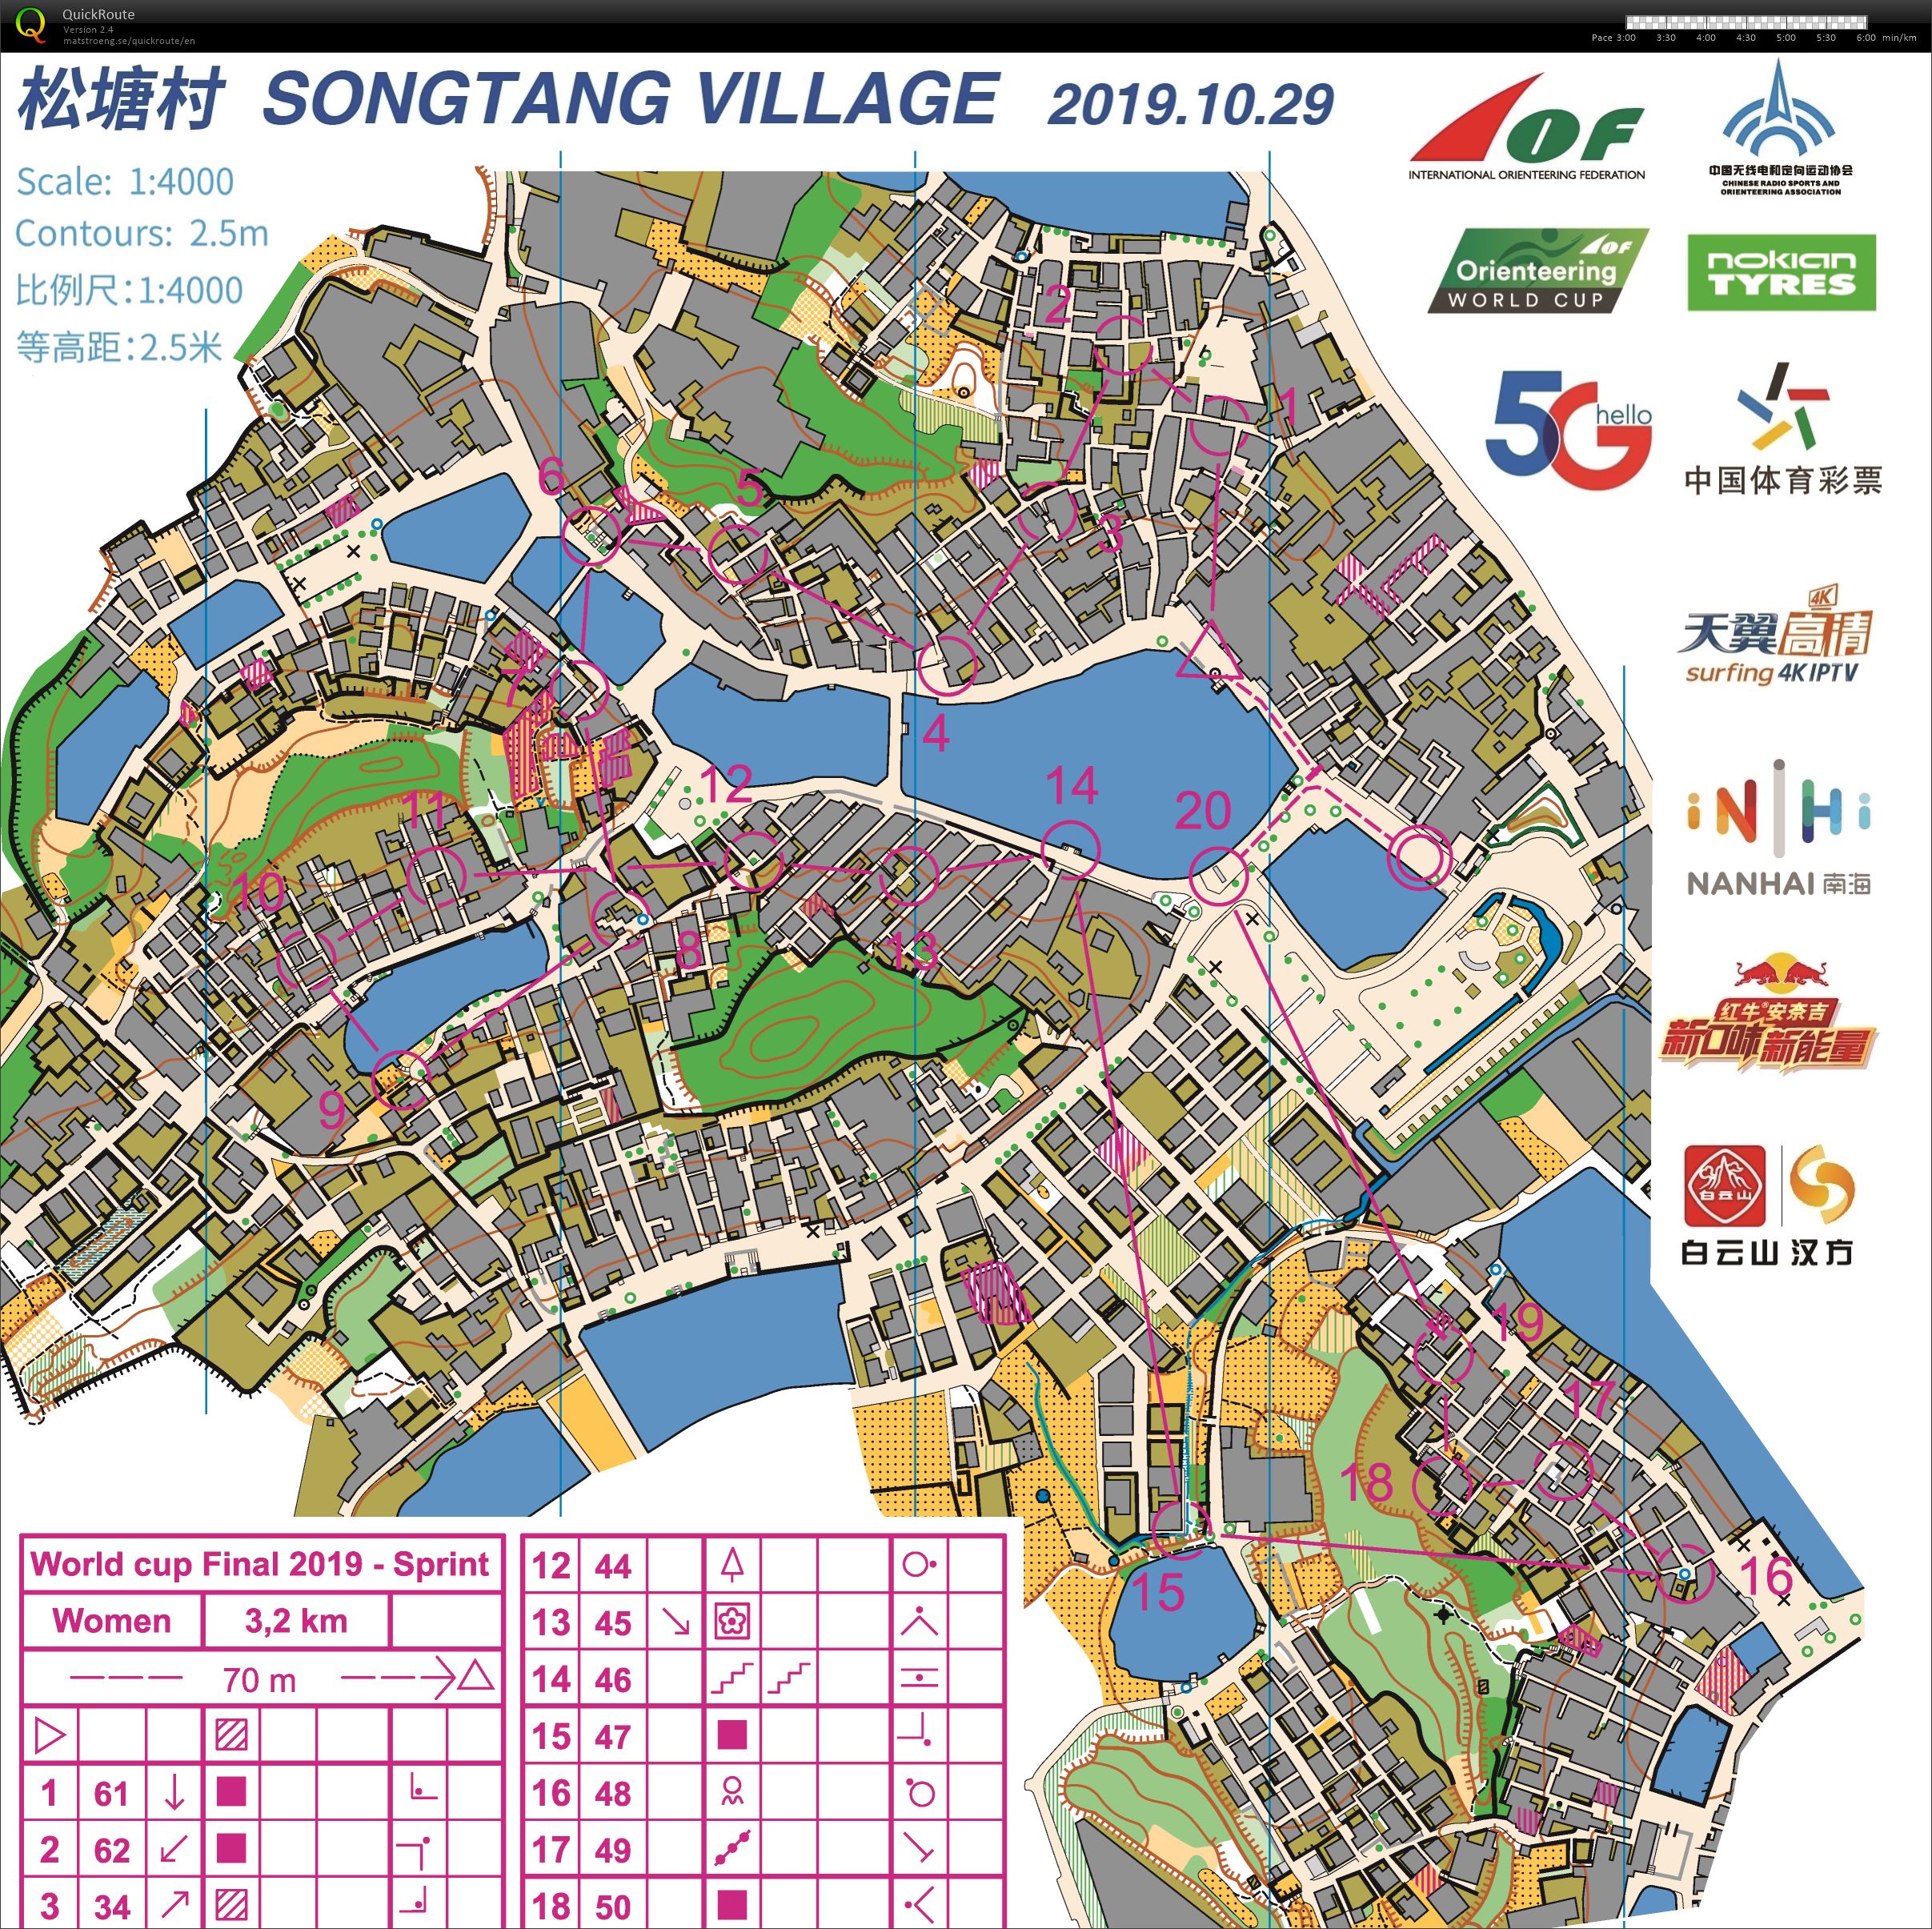 WCup China || Sprint (29/10/2019)